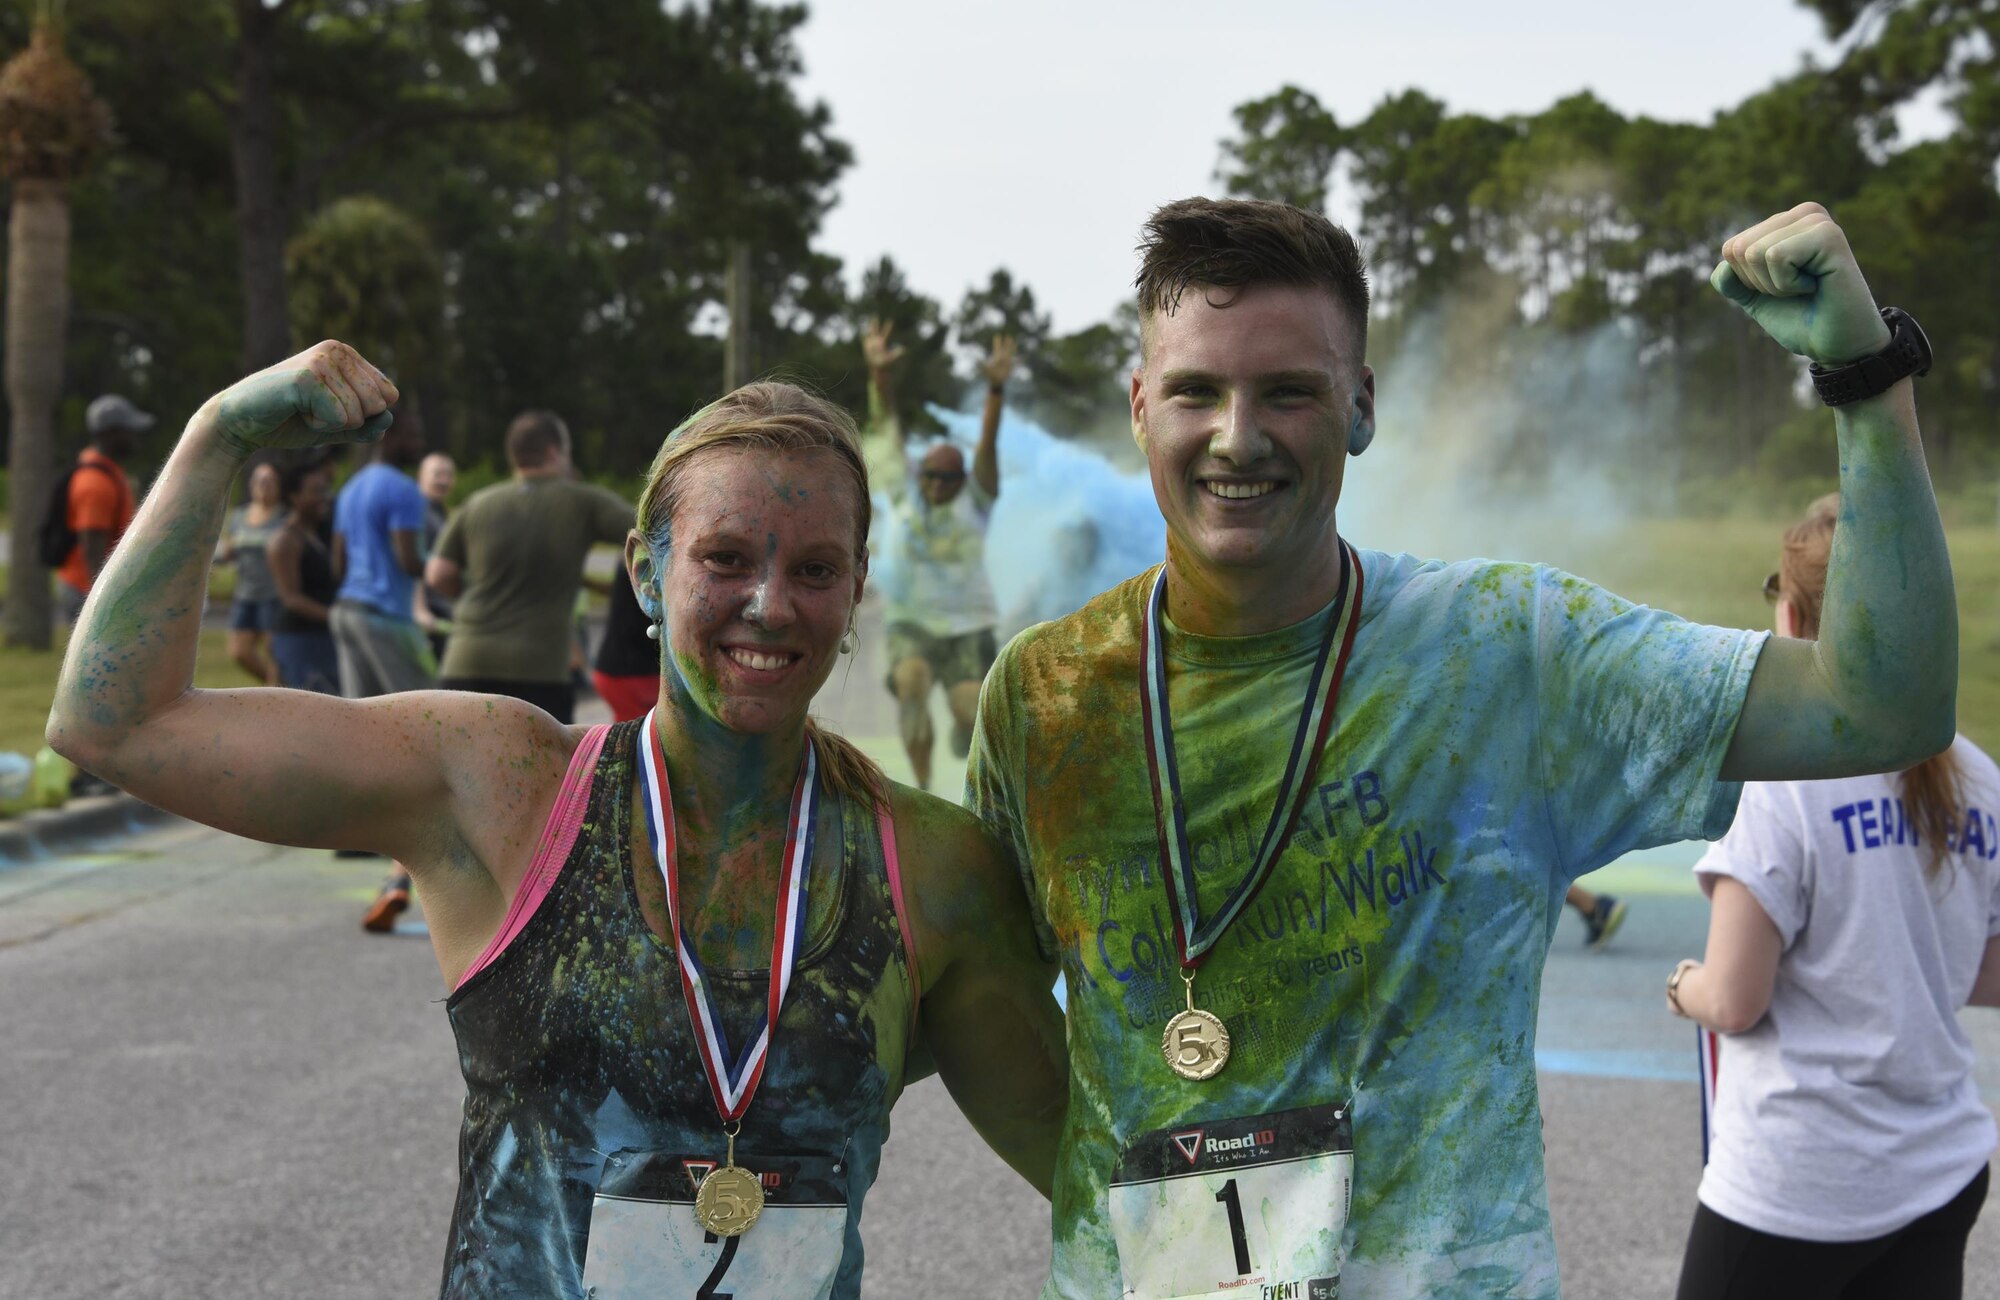 – In a multi-tiered effort to raise esprit de corps, community outreach, and raise money for the 2017 Tyndall Air Force Ball, Tyndall hosted its second annual 5K color run/walk Aug. 26, 2017.
The event allowed approximately 100 participants from Tyndall and the surrounding area to enjoy a fun run with their friends and family.